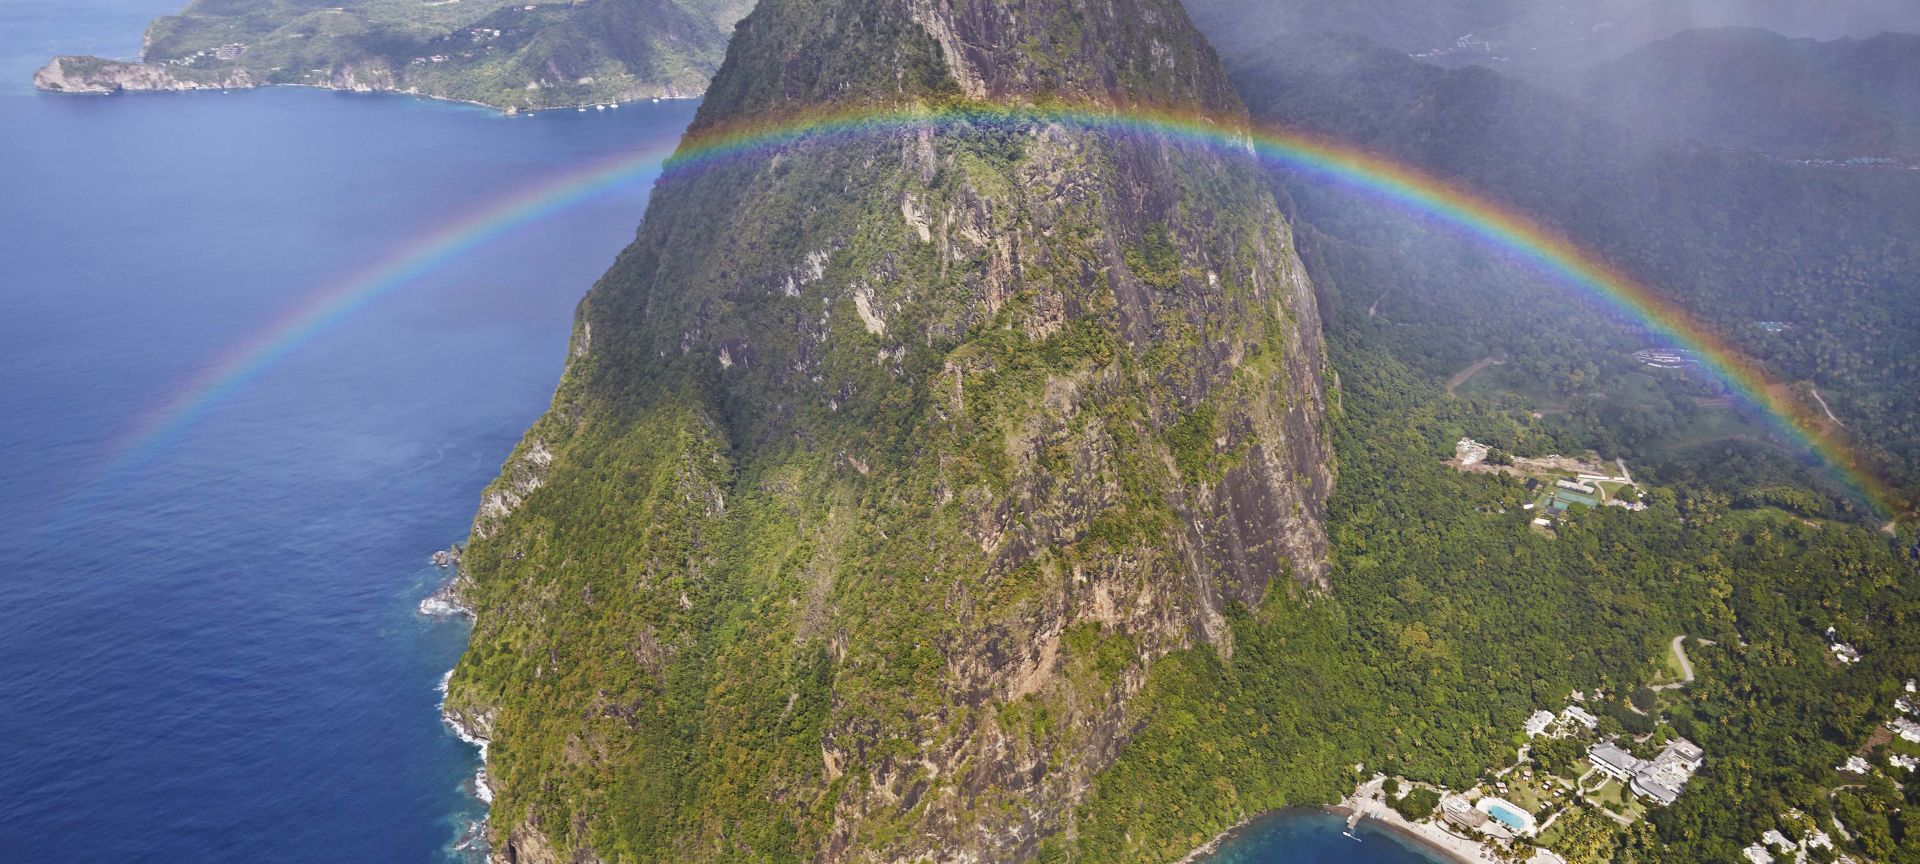 A Rainbow Over A Body Of Water With Pitons In The Background